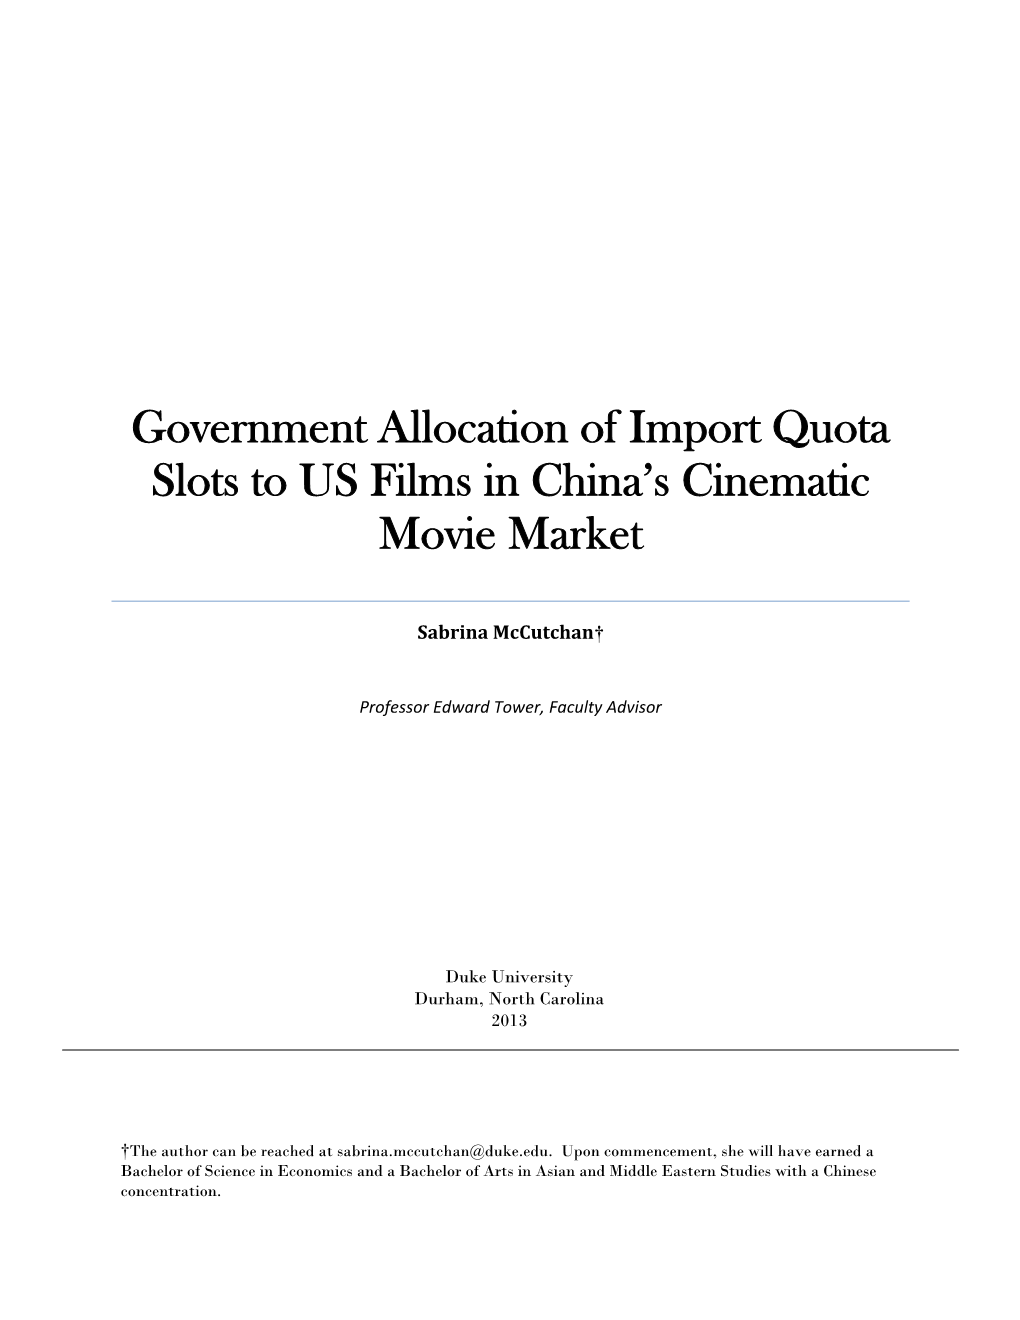 Government Allocation of Import Quota Slots to US Films in China's Cinematic Movie Market